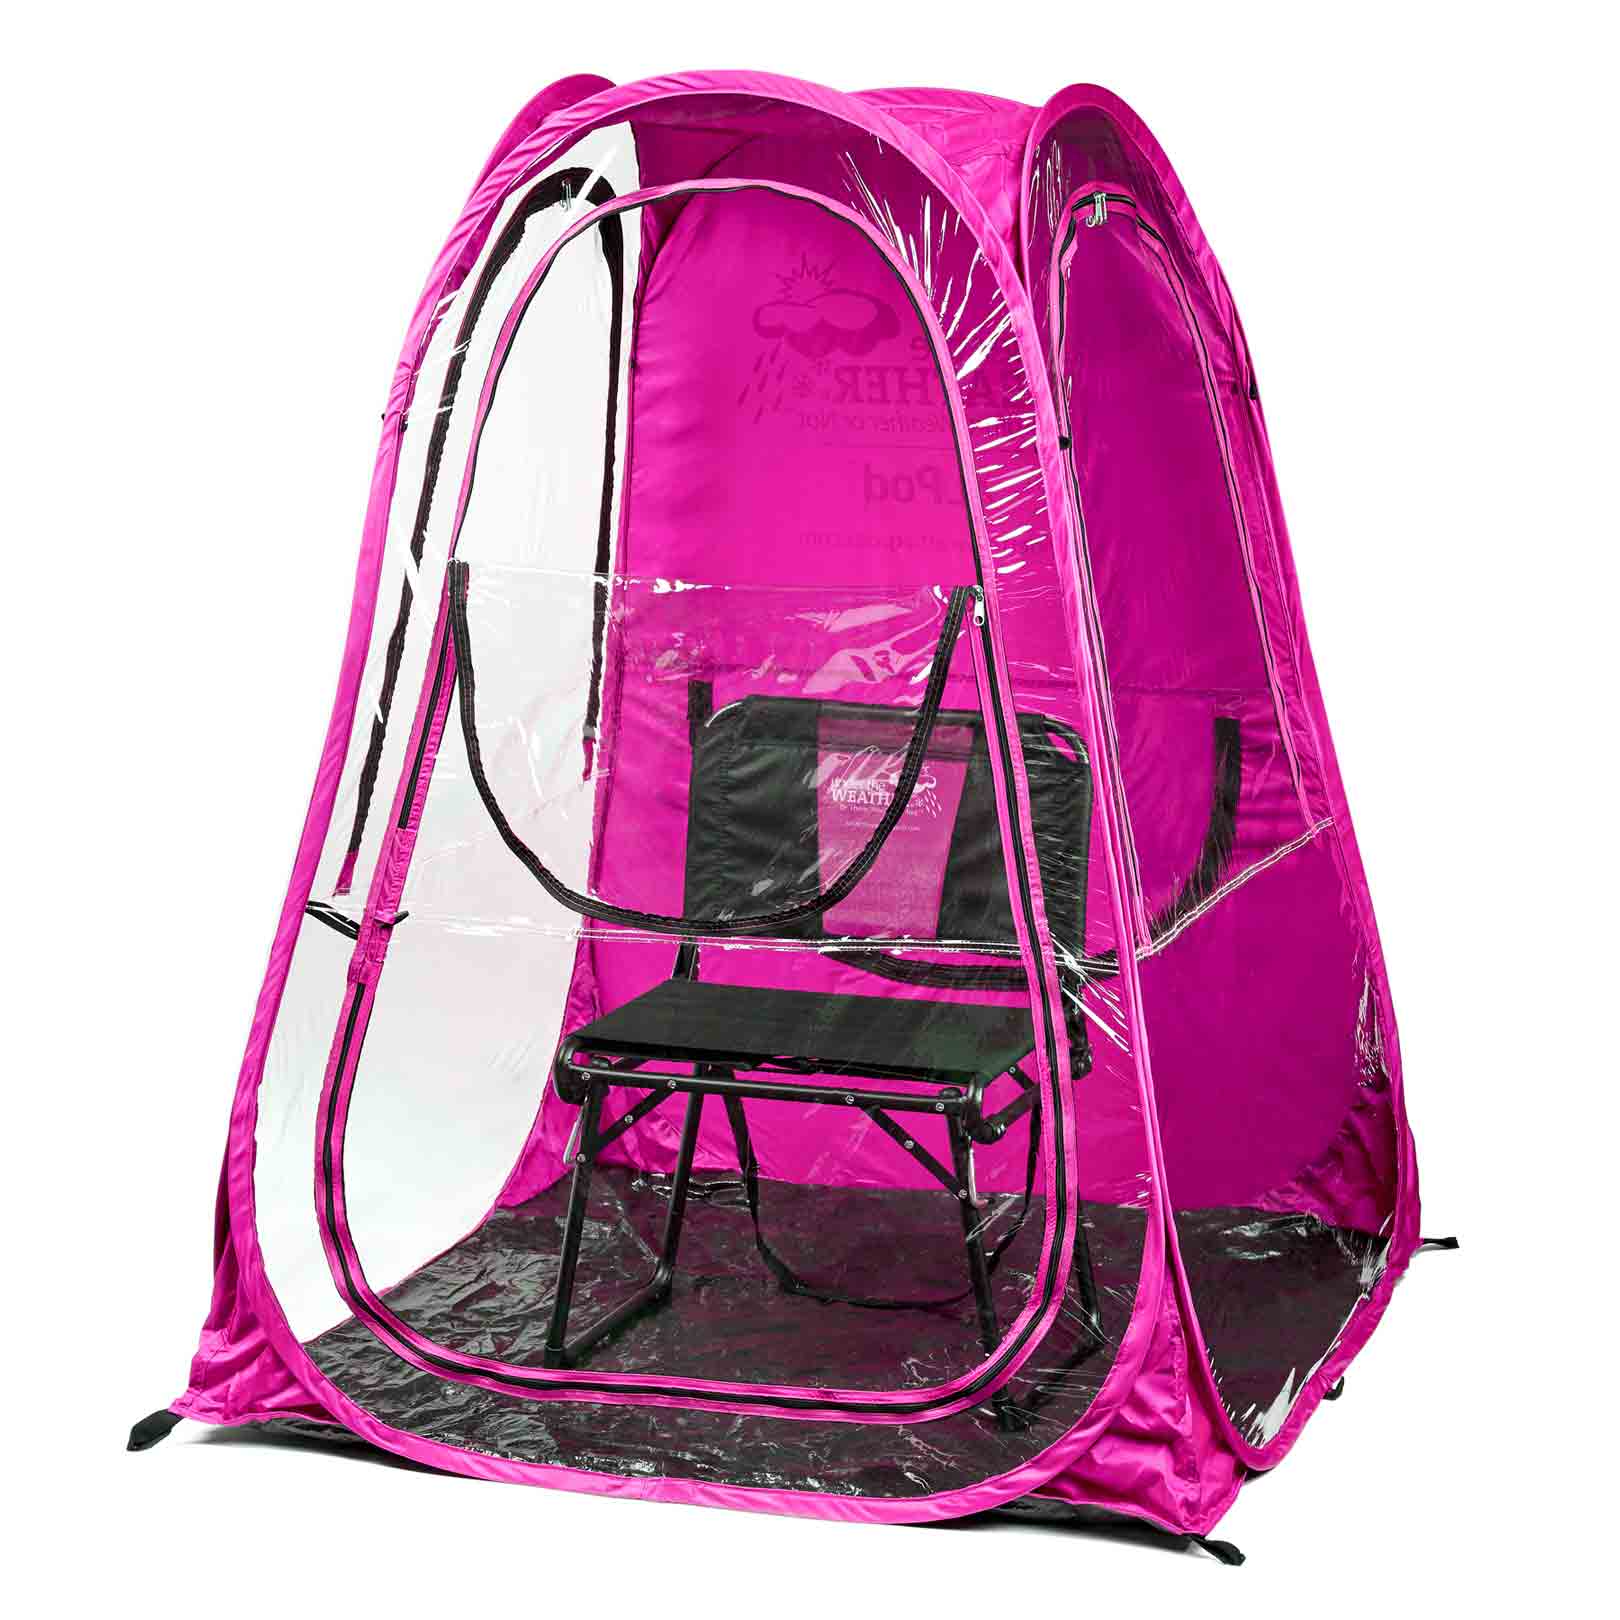 OriginalPod™ XL Camo 1-Person Pop-up Tent - pink - front unzipped - Under the Weather® - Personal pop-up sports tent for mom, dad, kids, parents - Perfect for soccer, baseball, softball, football, youth team sports - As Seen on Shark Tank